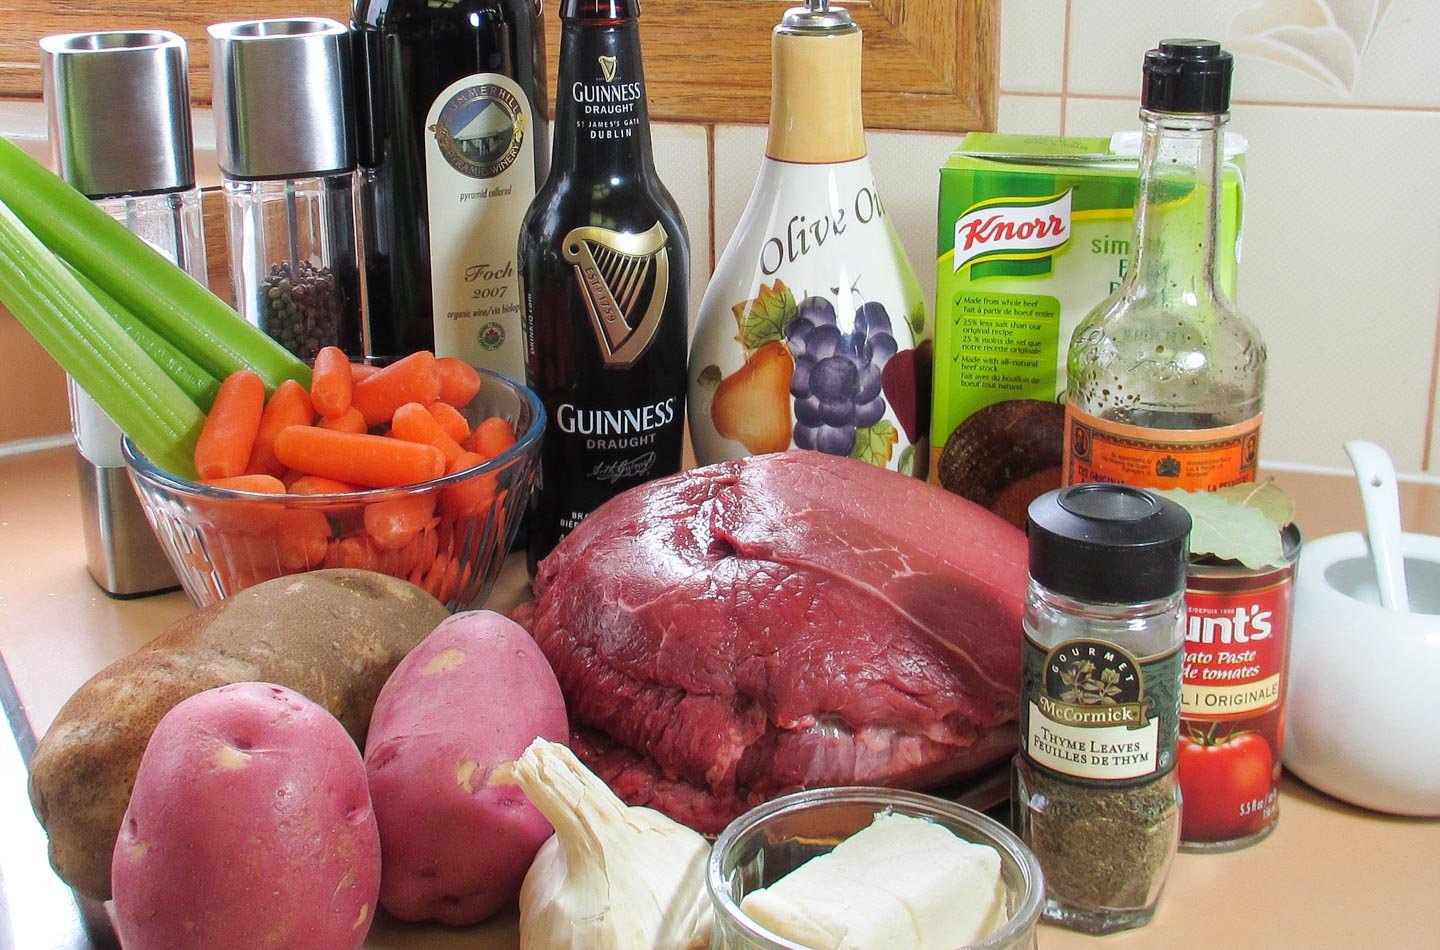 Chuck of beef, vegetables and all ingredients for making Irish Stew.